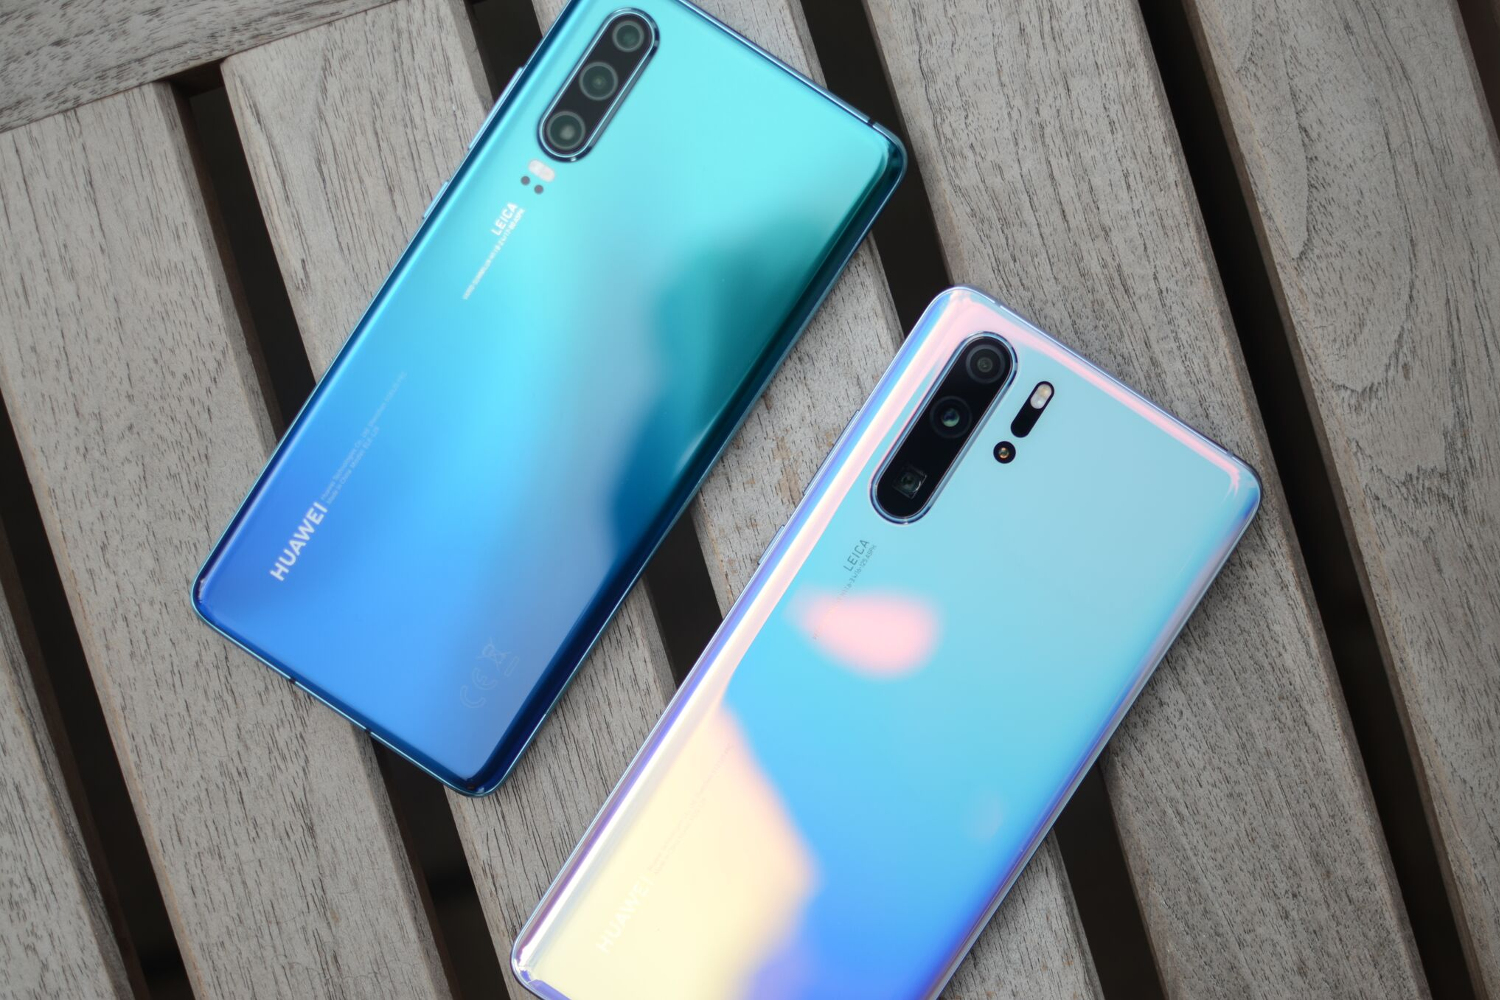 Huawei P30 Pro and P30: News, Features, and Specs